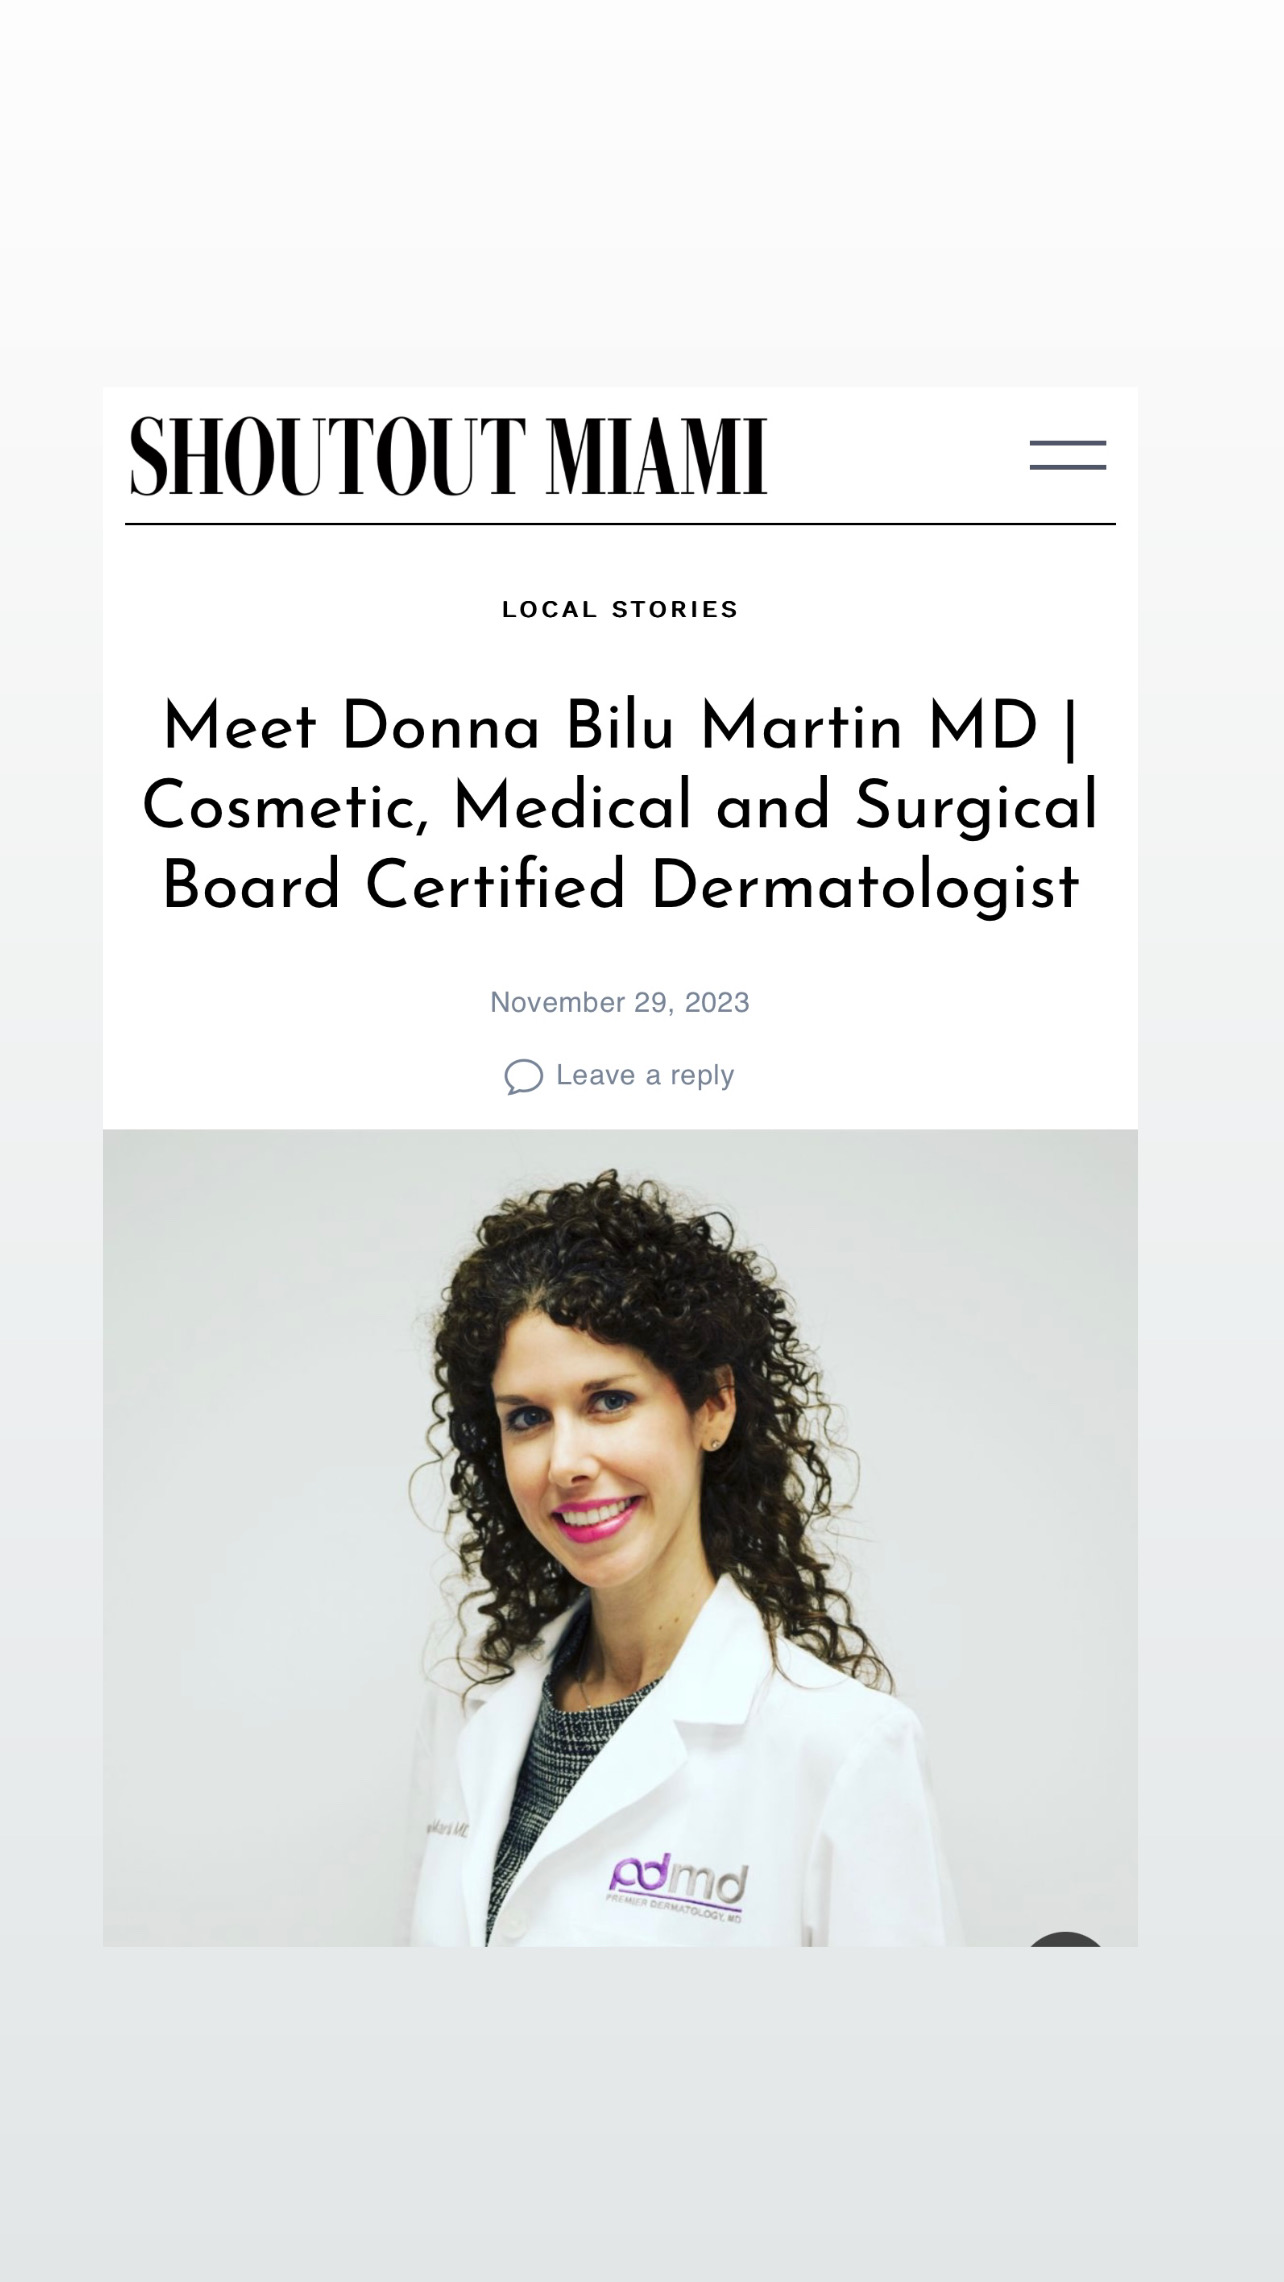 Dr. Bilu Martin is featured on shoutoutmiami.com